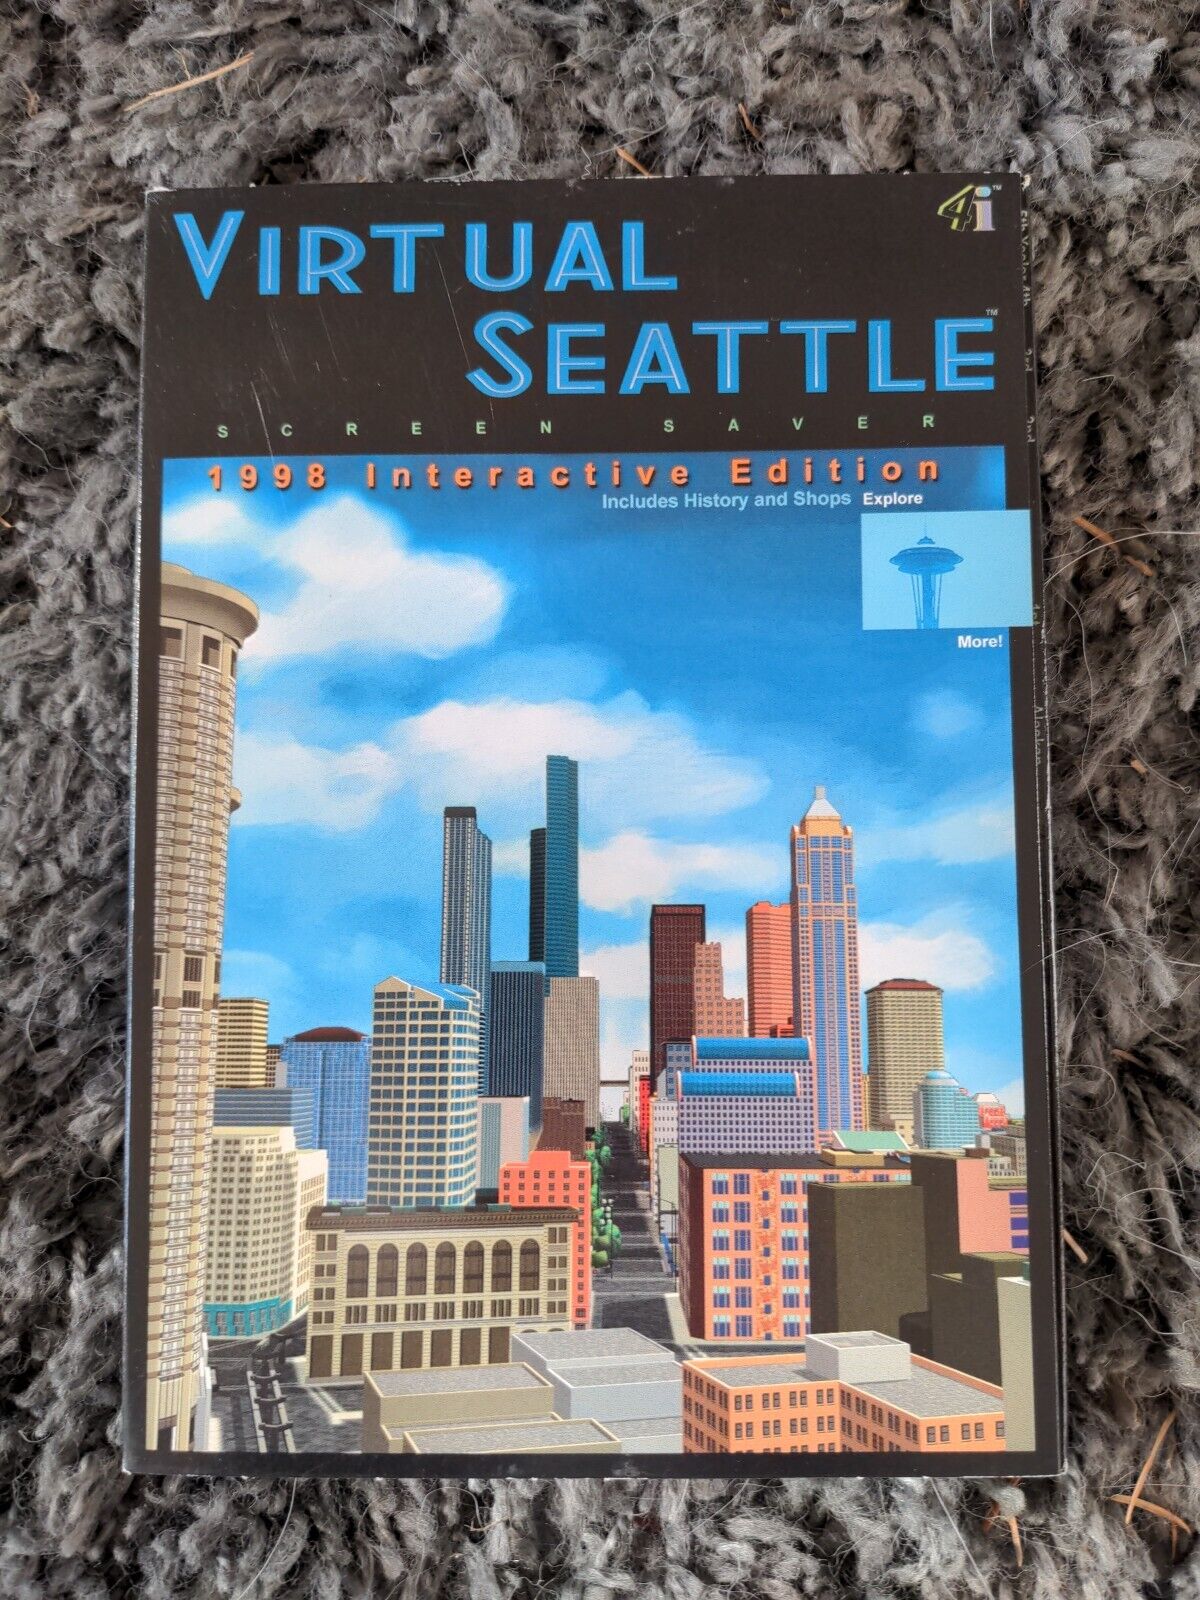 VTG Virtual Seattle 99 Interactive Edition PC Game and Screensaver 1999 NEW